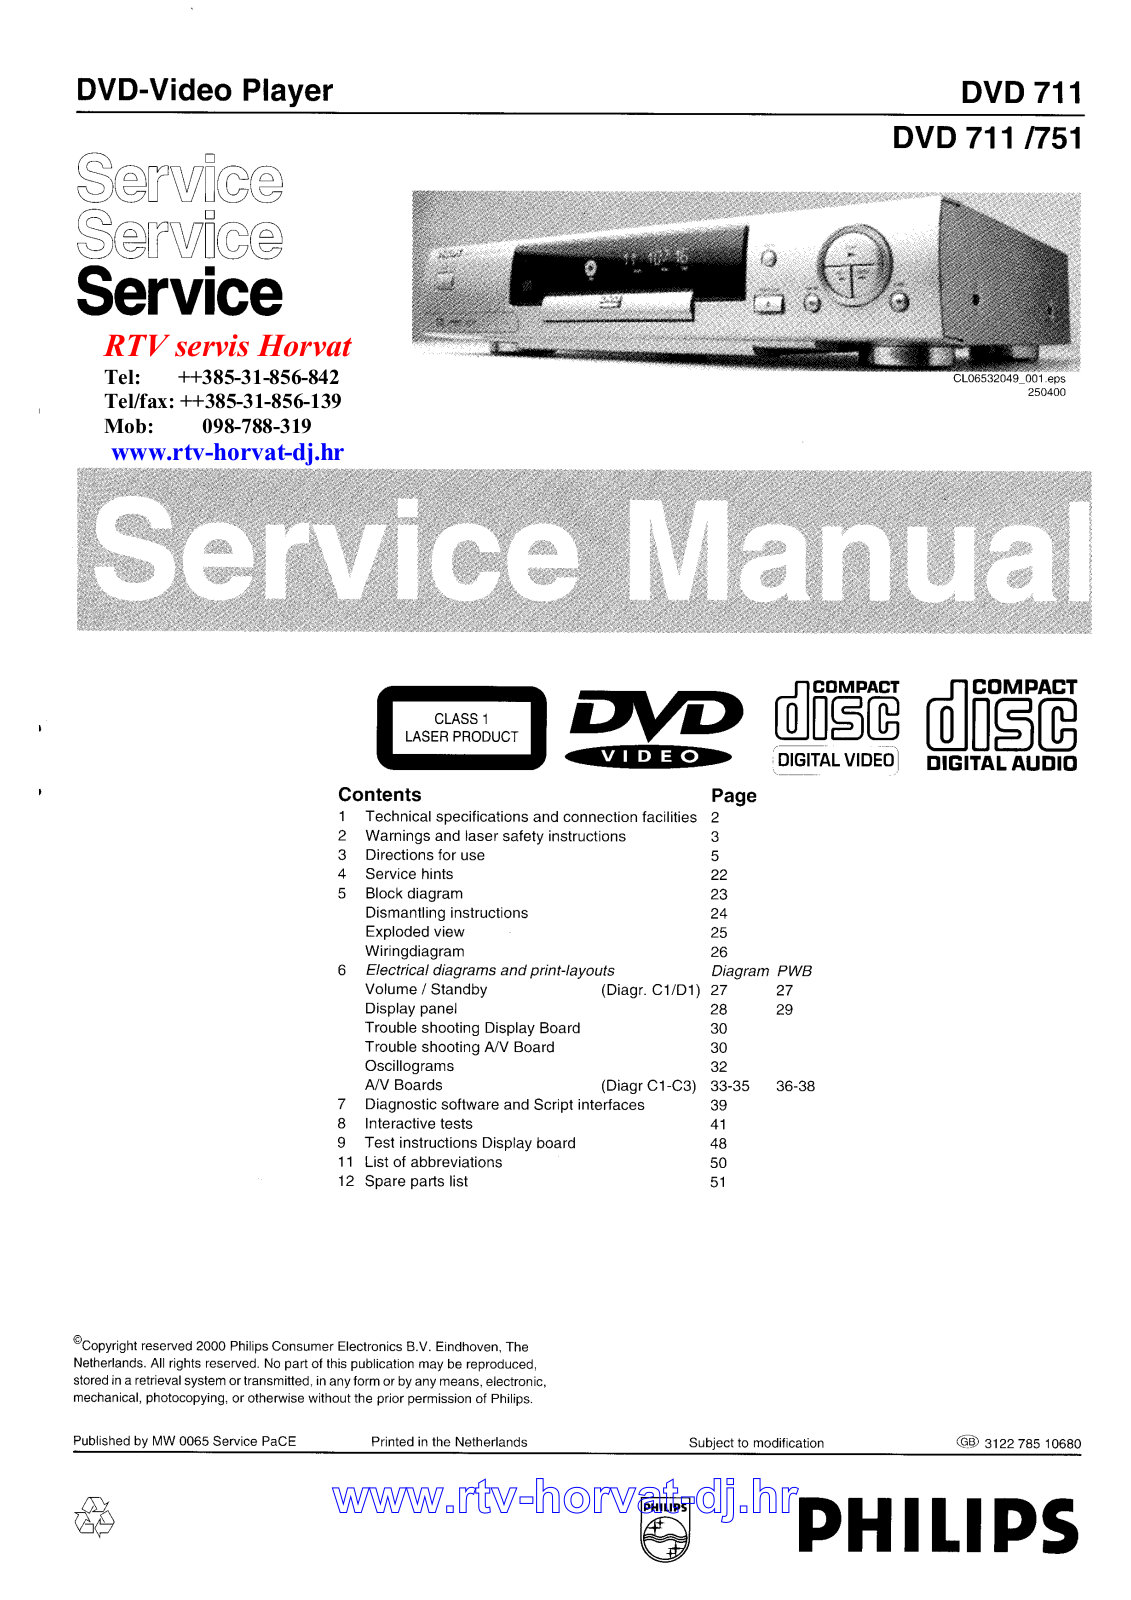 Philips DVD-711 Service manual